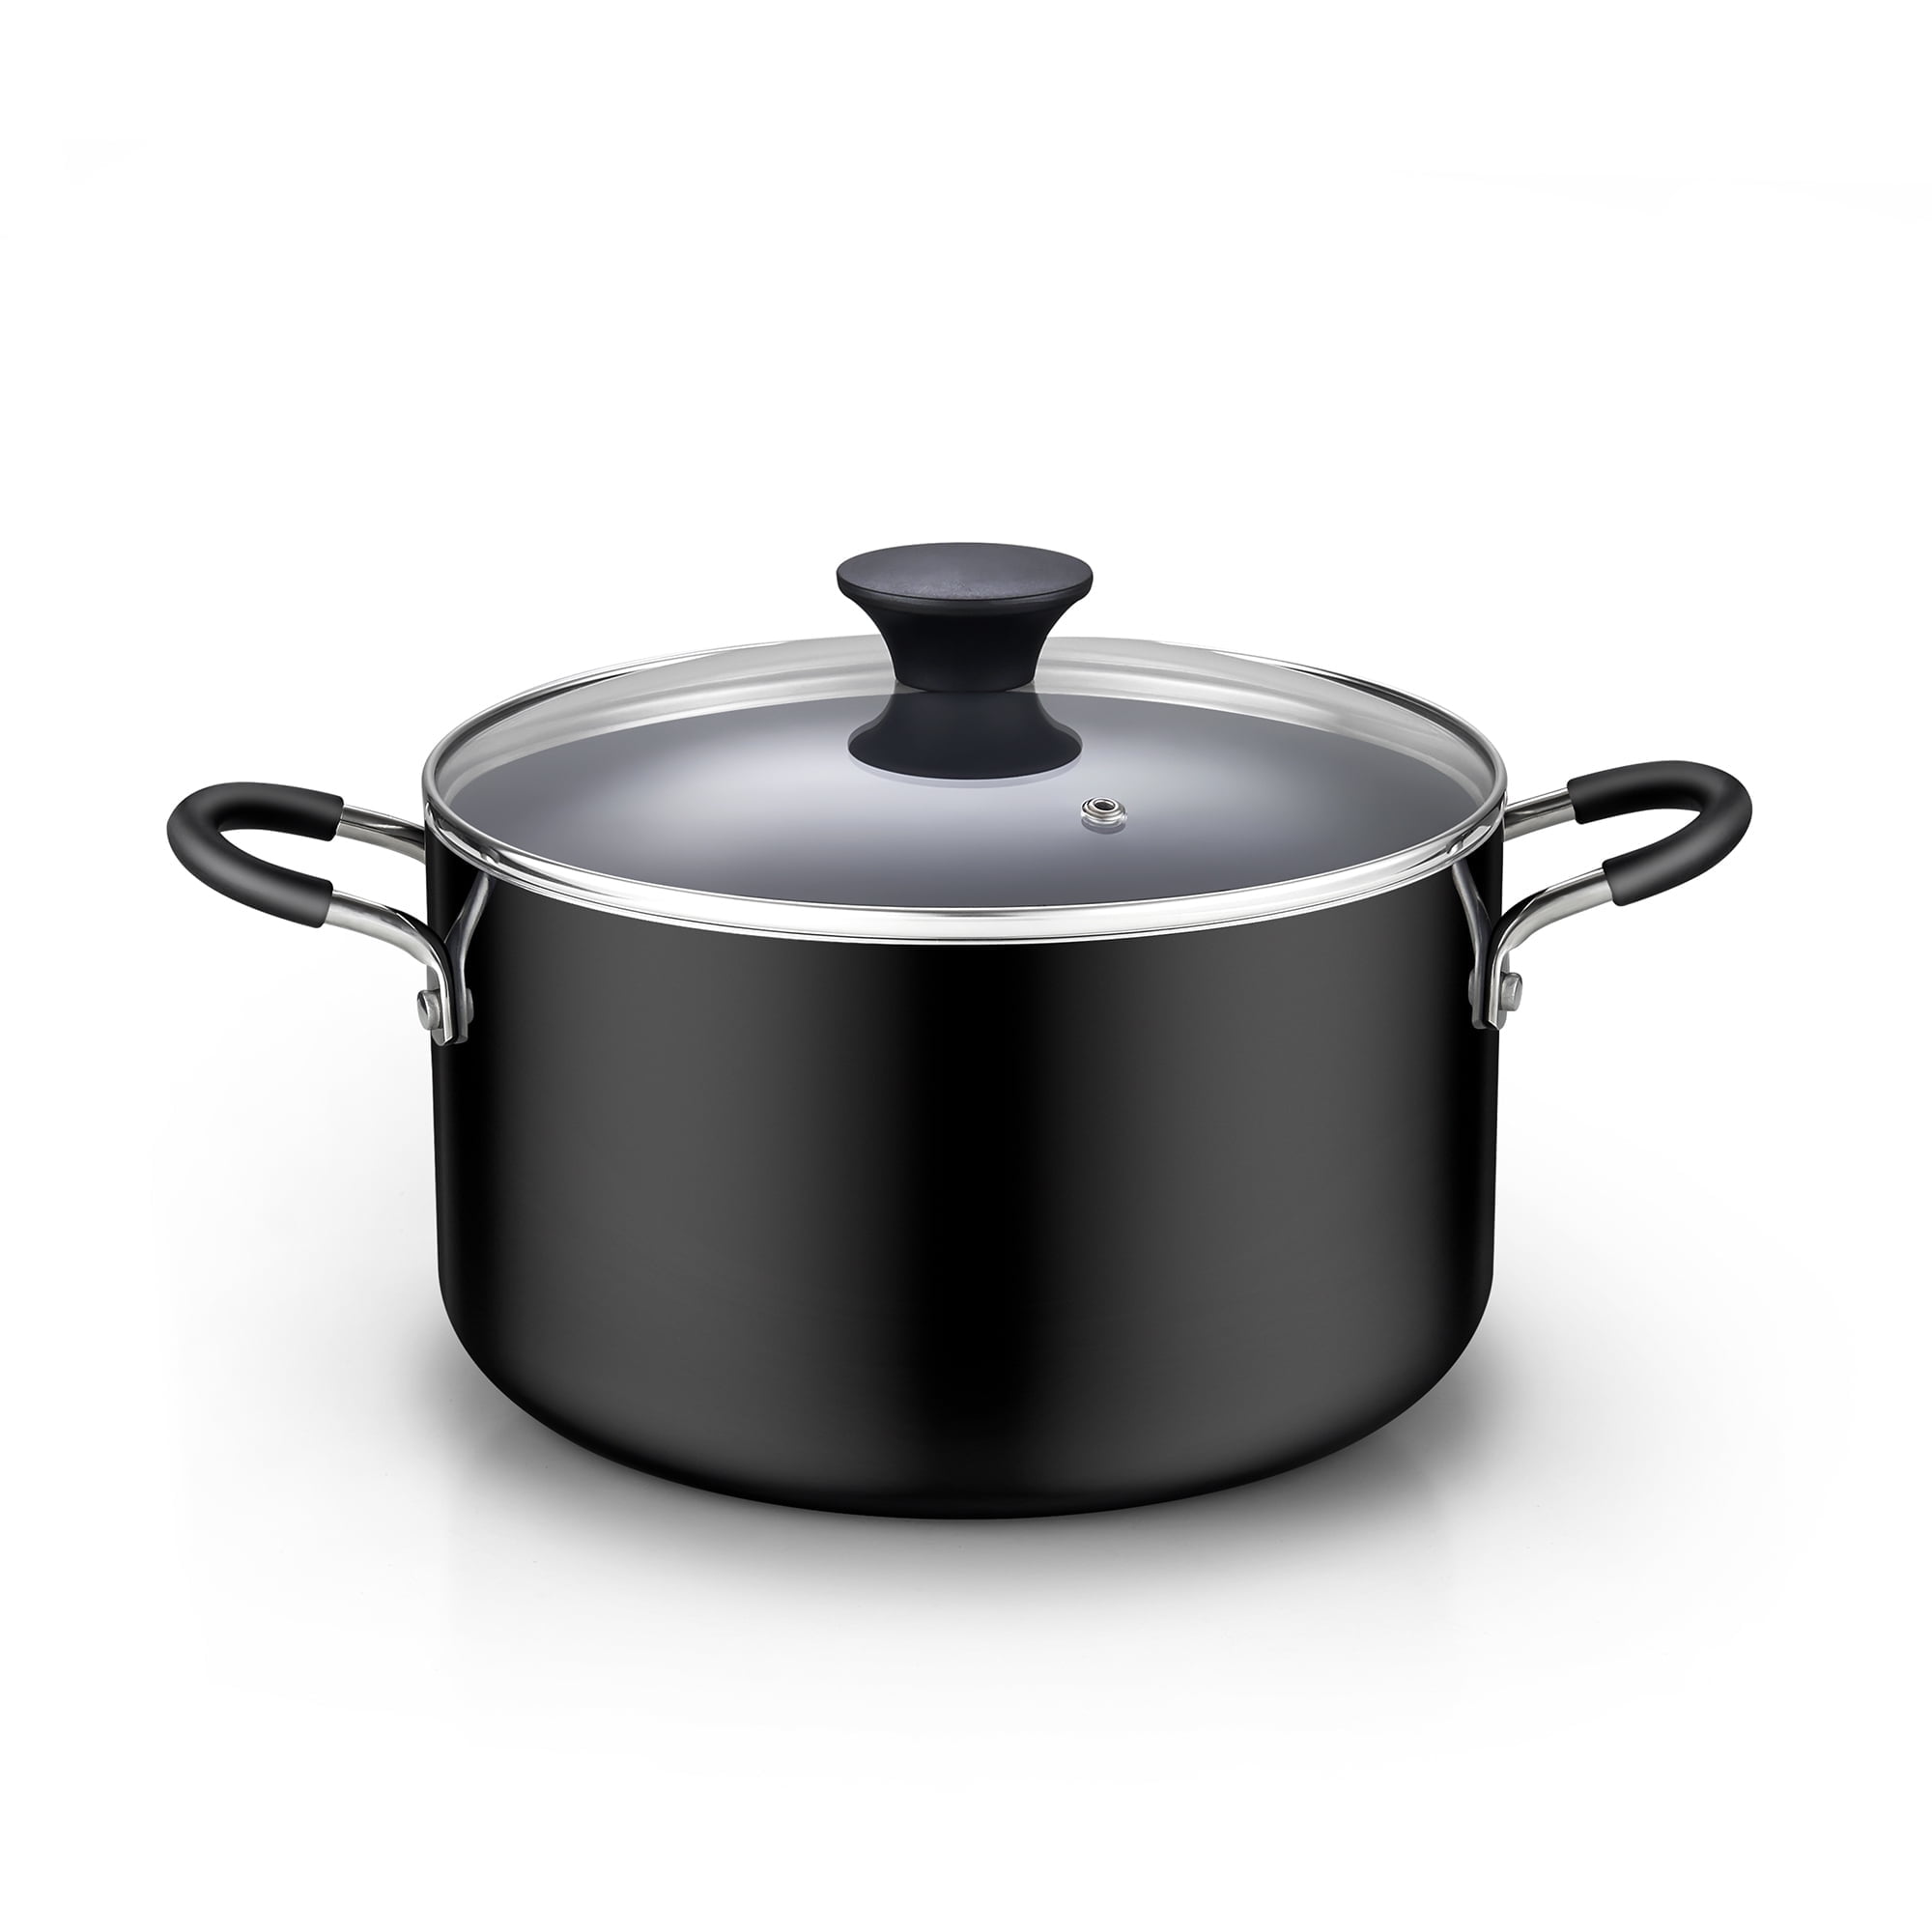 D&W Saucepan NonStick With Lid 7 inch Small Stock Pot PFOA Free Dishwasher  Safe